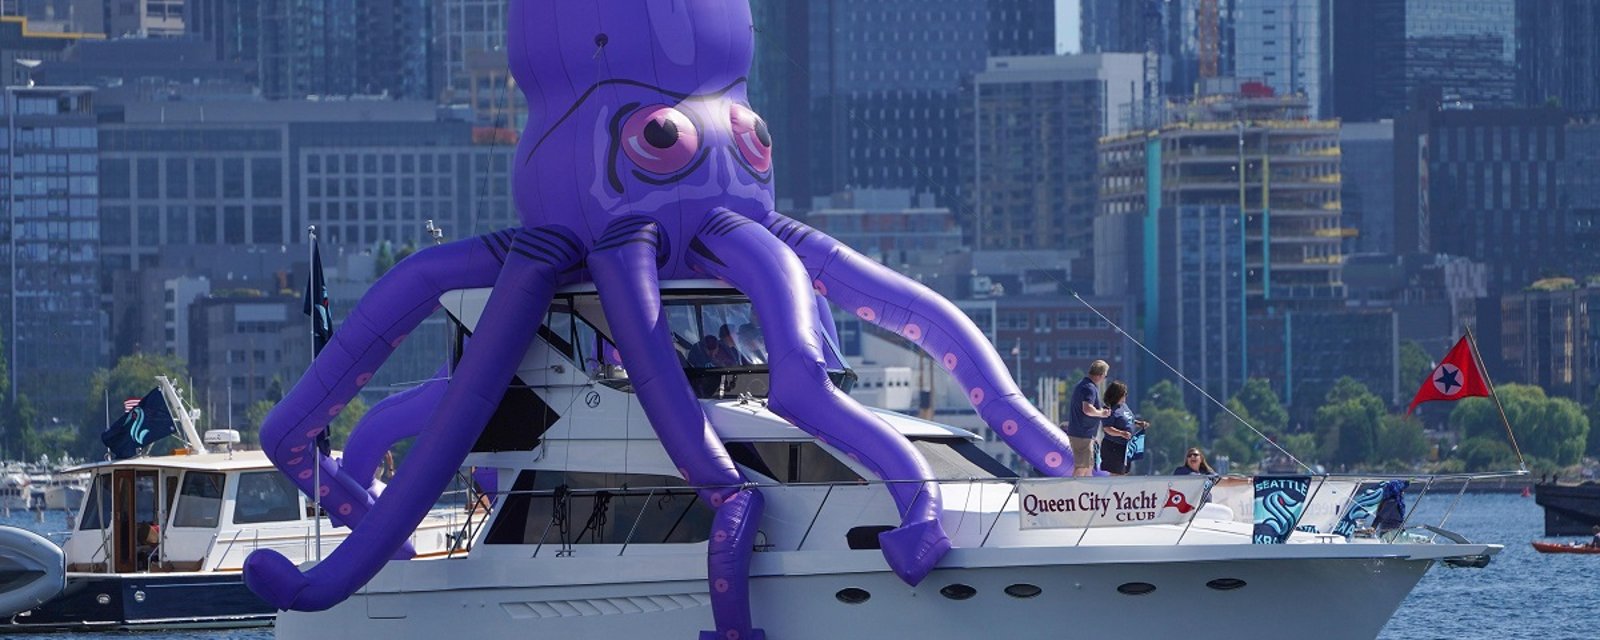 Detroit Red Wings accuse the Seattle Kraken of stealing their mascot.